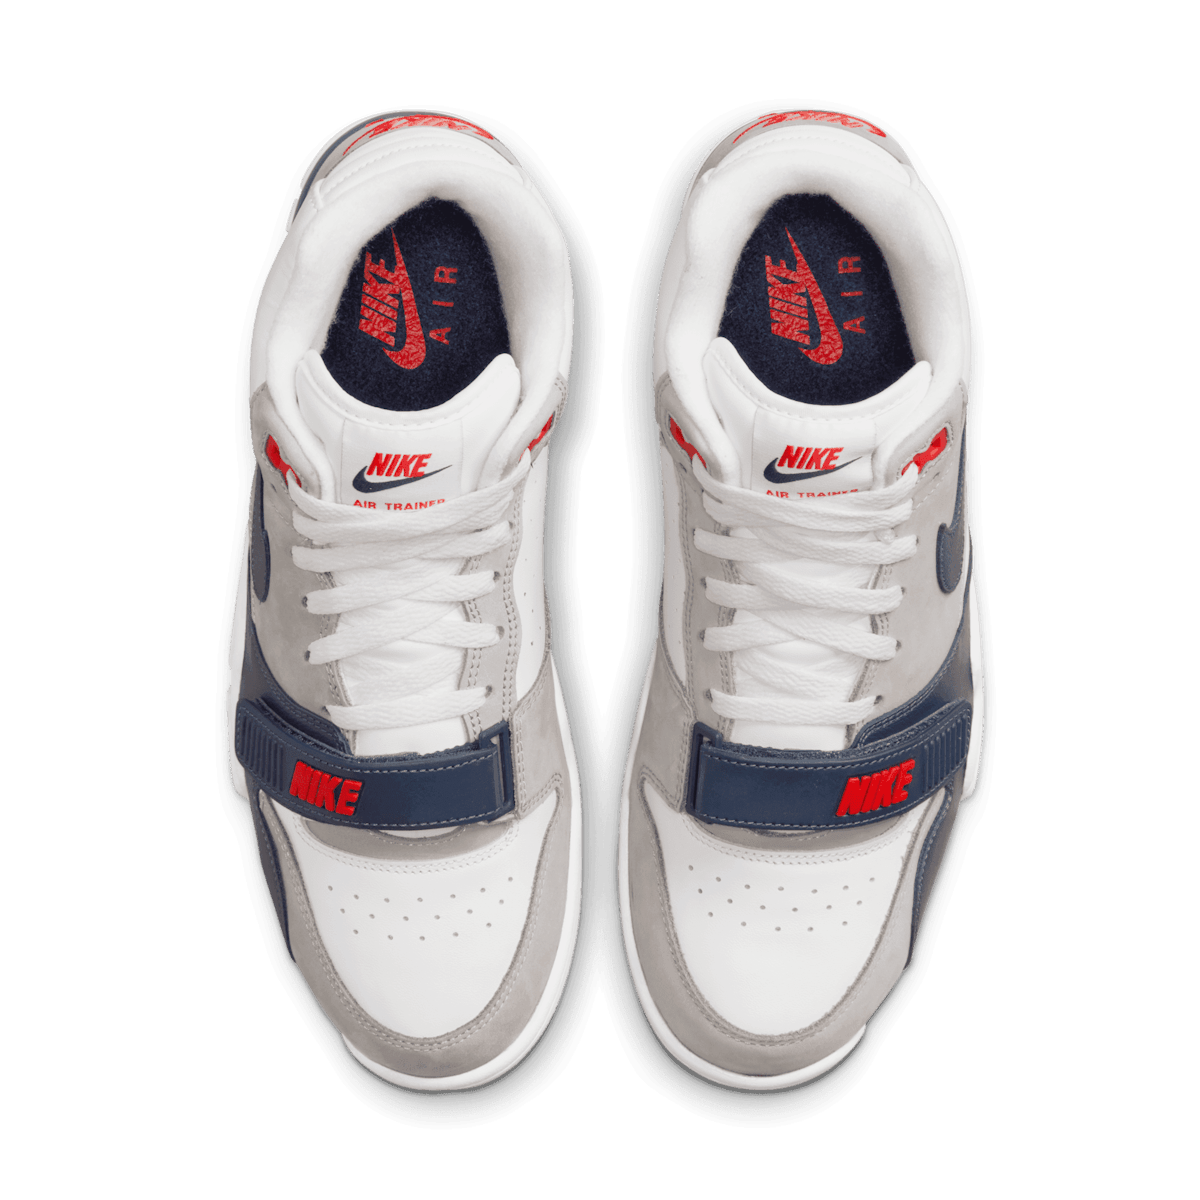 Nike Air Trainer 1 Midnight Navy Angle 1